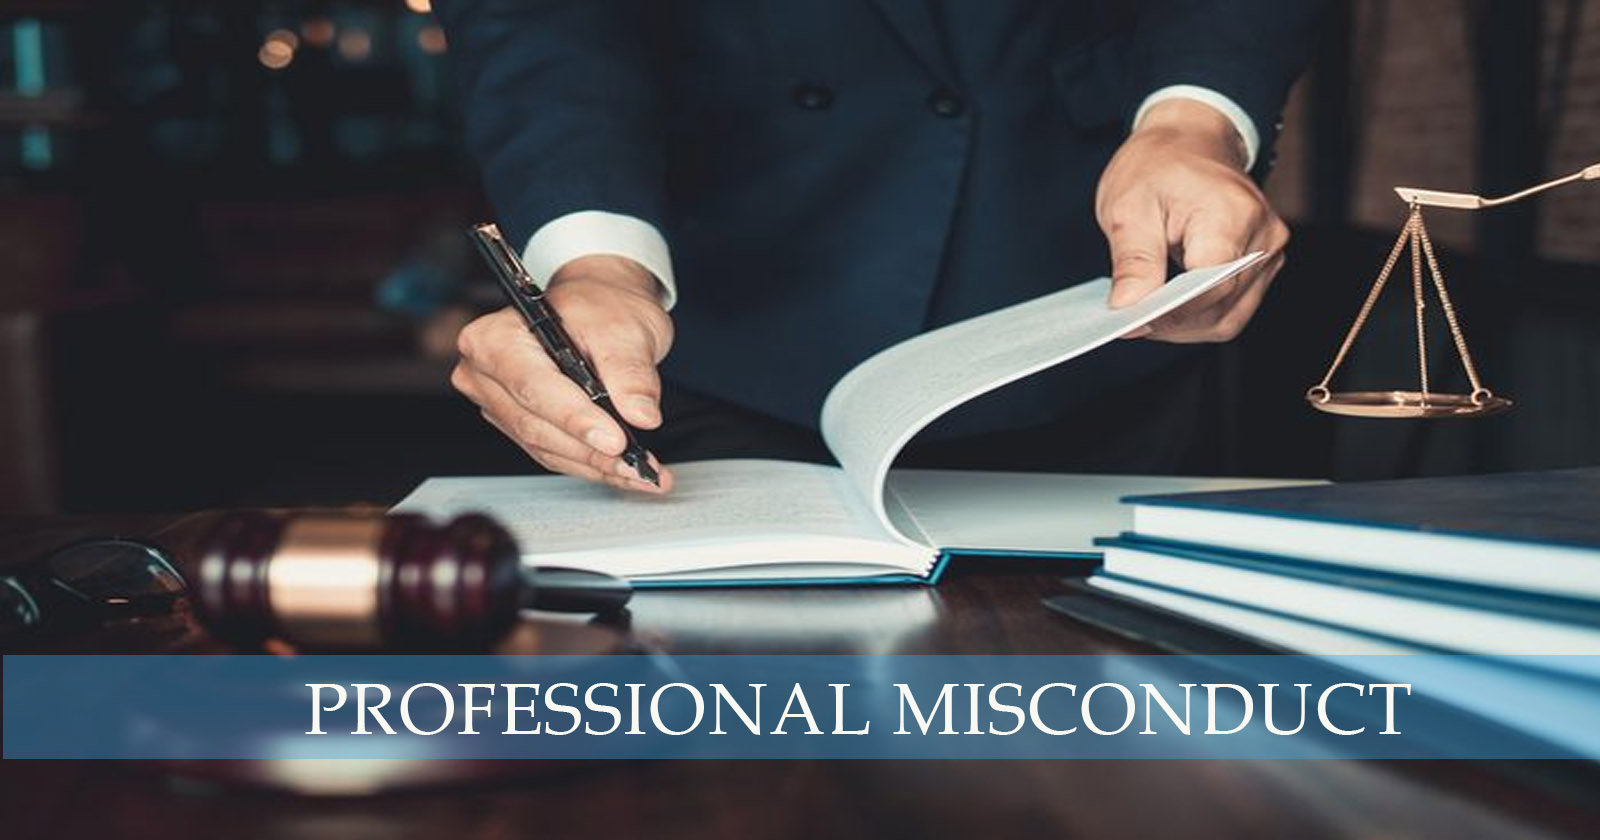 ICAI - Professional Misconduct - ICAI Imposes Penalty - Chartered Accountants - TAXSCAN